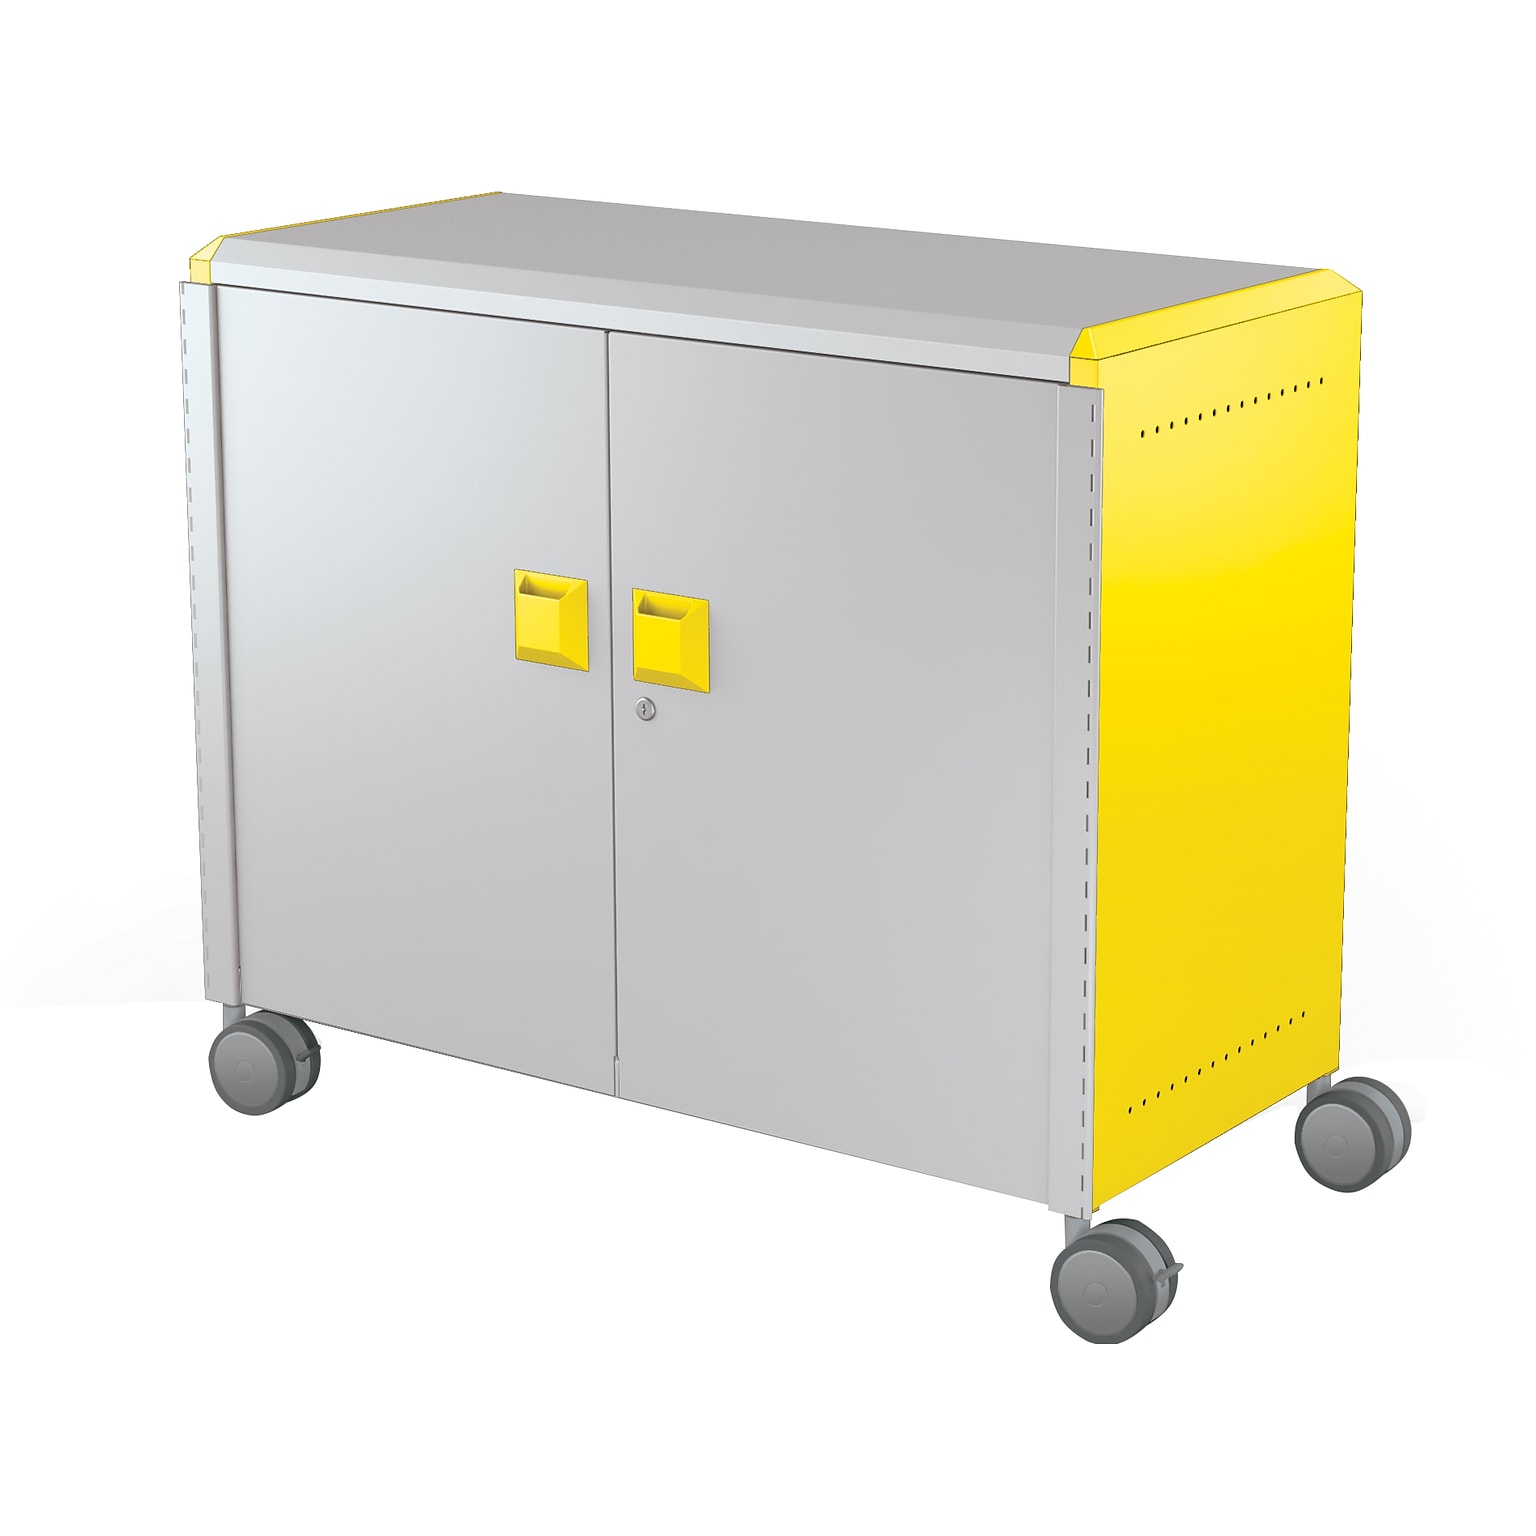 MooreCo Compass Maxi H2 Mobile 9-Section Storage Cabinet, 36.13H x 41.88W x 19.13D, Platinum/Yellow Metal (B3A1G2E1X0)